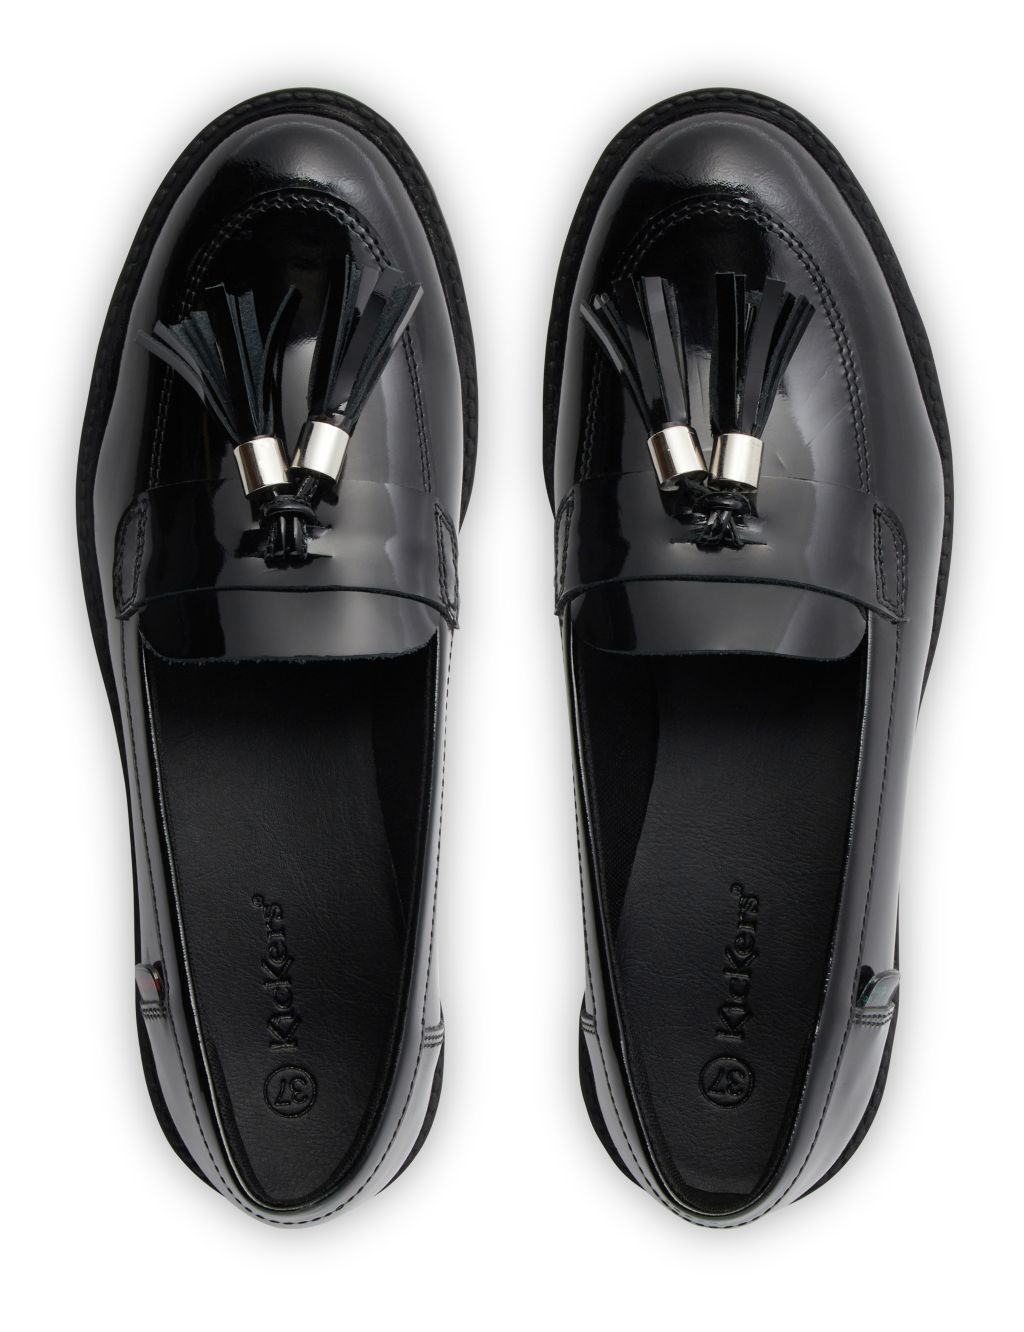 Leather Patent Tassel Loafers image 5